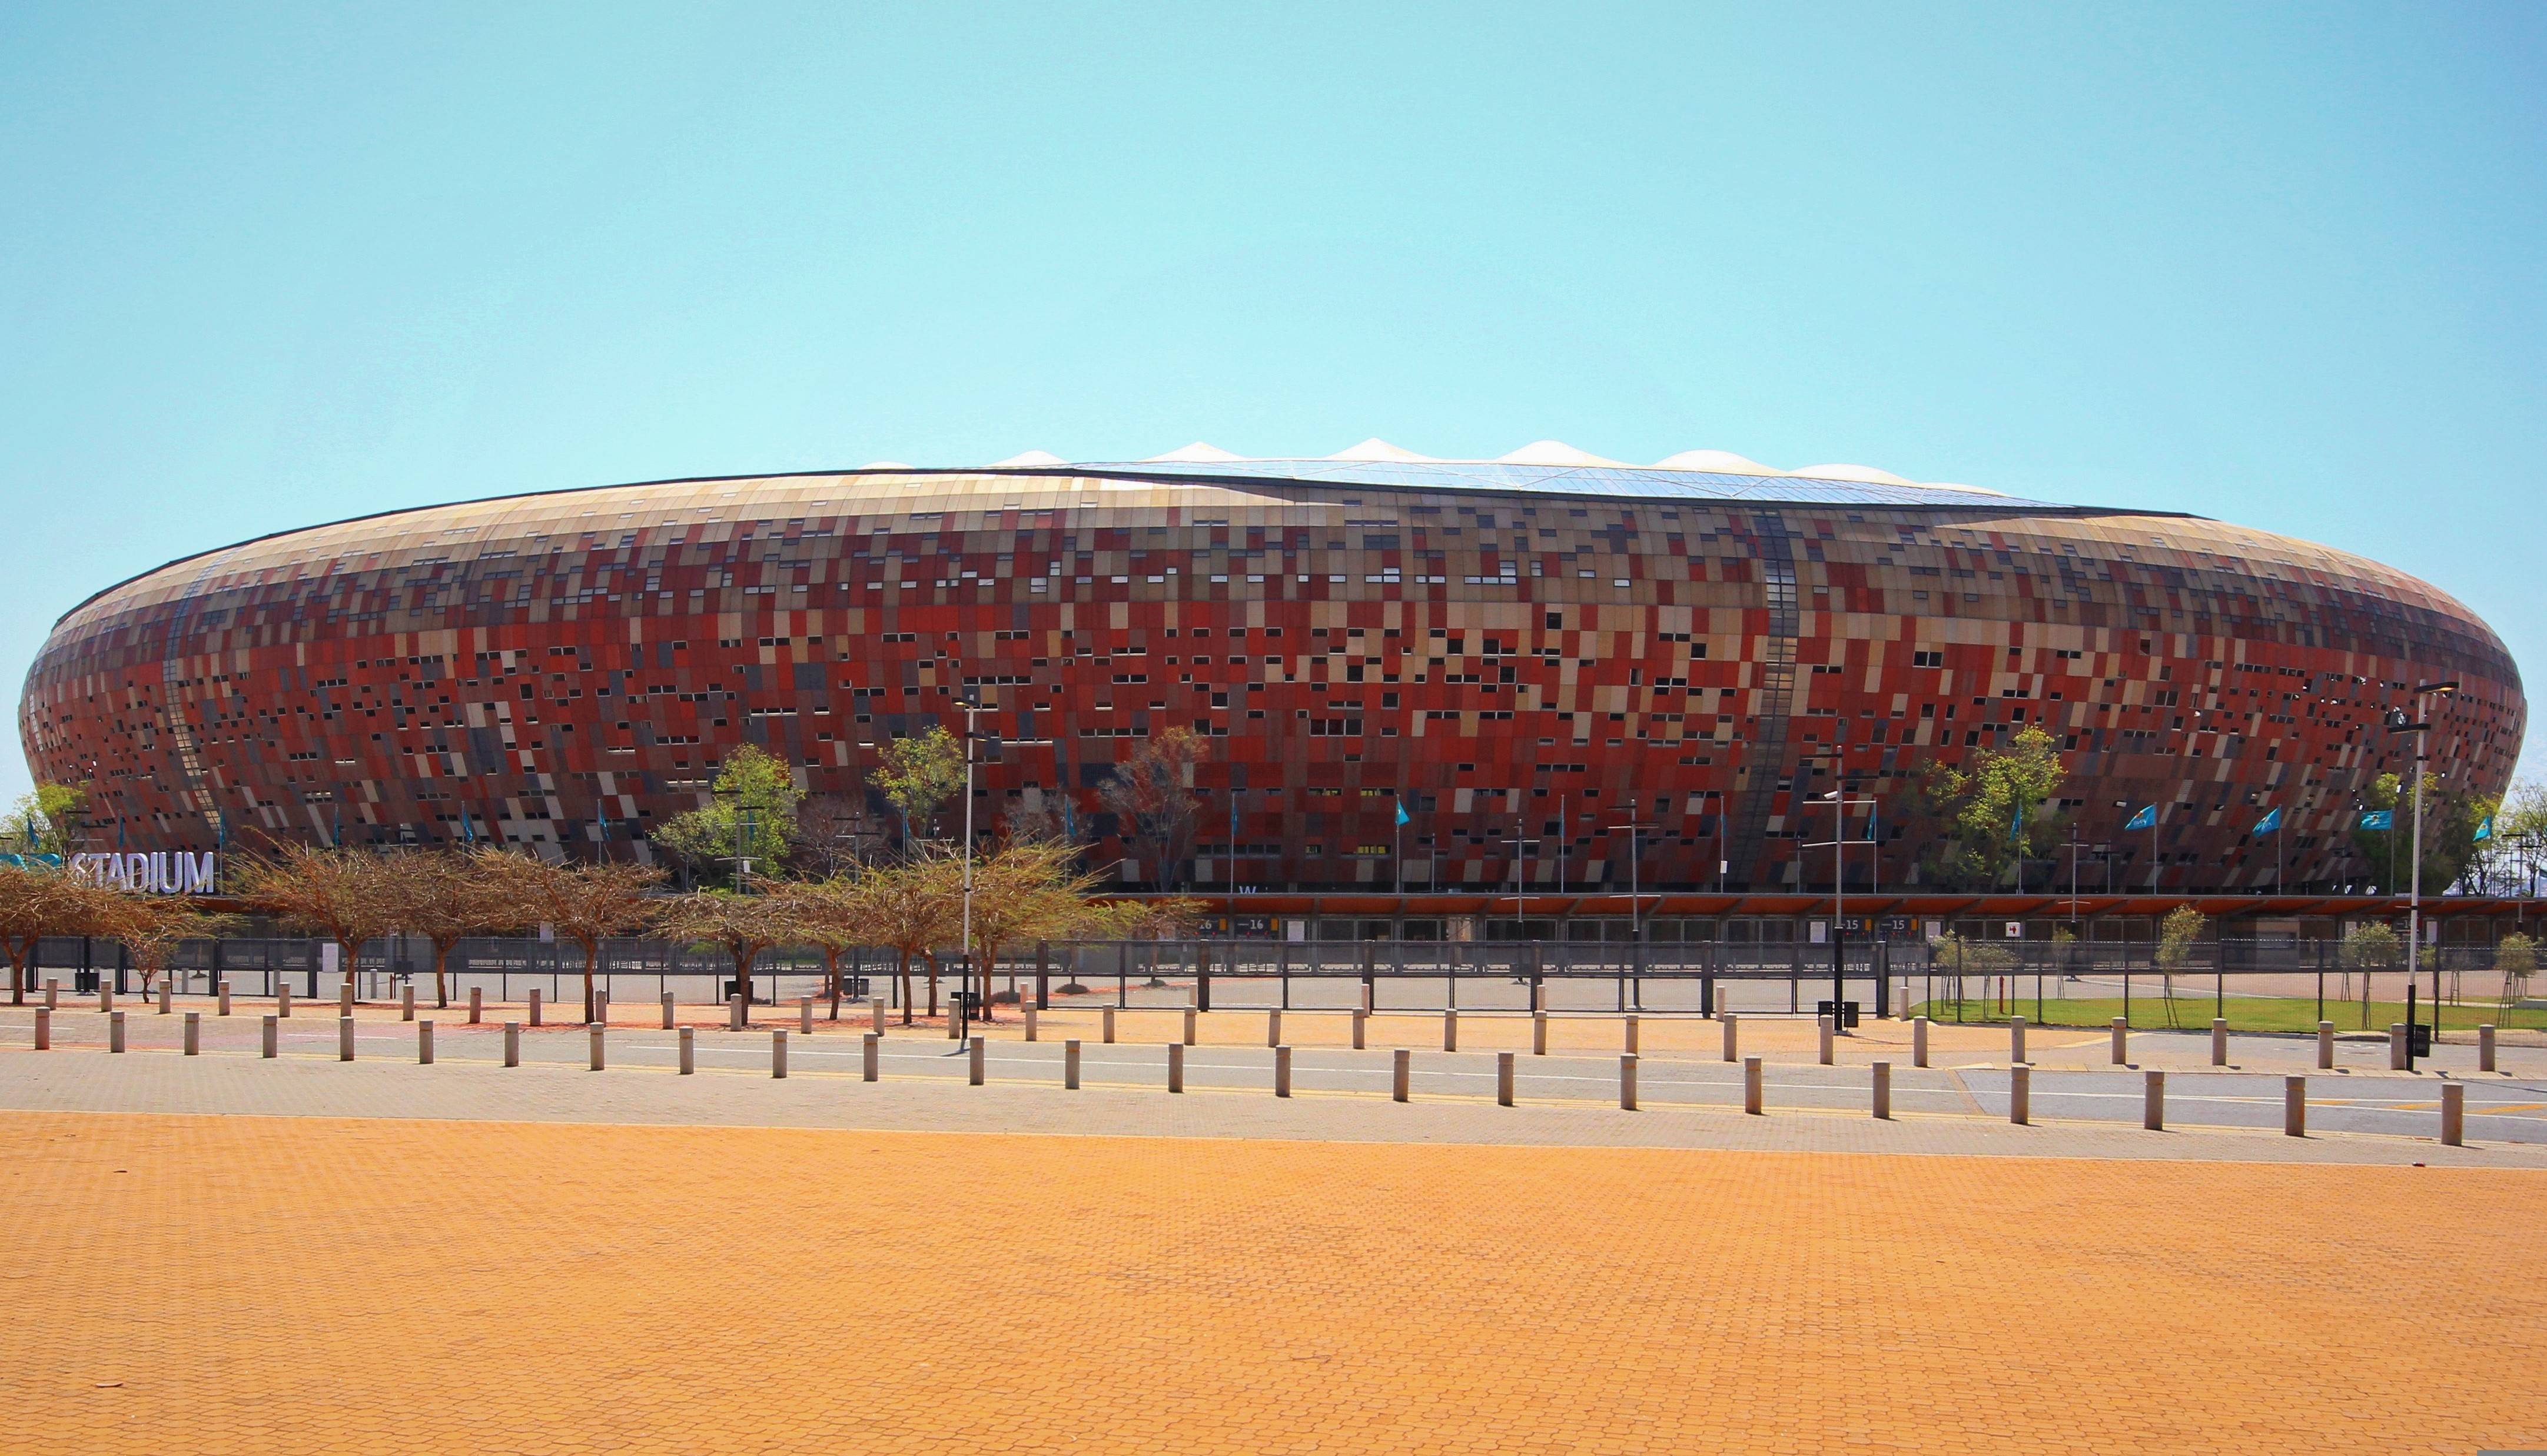 FNB Stadium also known as The Calabash due to its shape as an African pot, Johannesburg, South Africa [OC] [4327x2474]: ArchitecturePorn